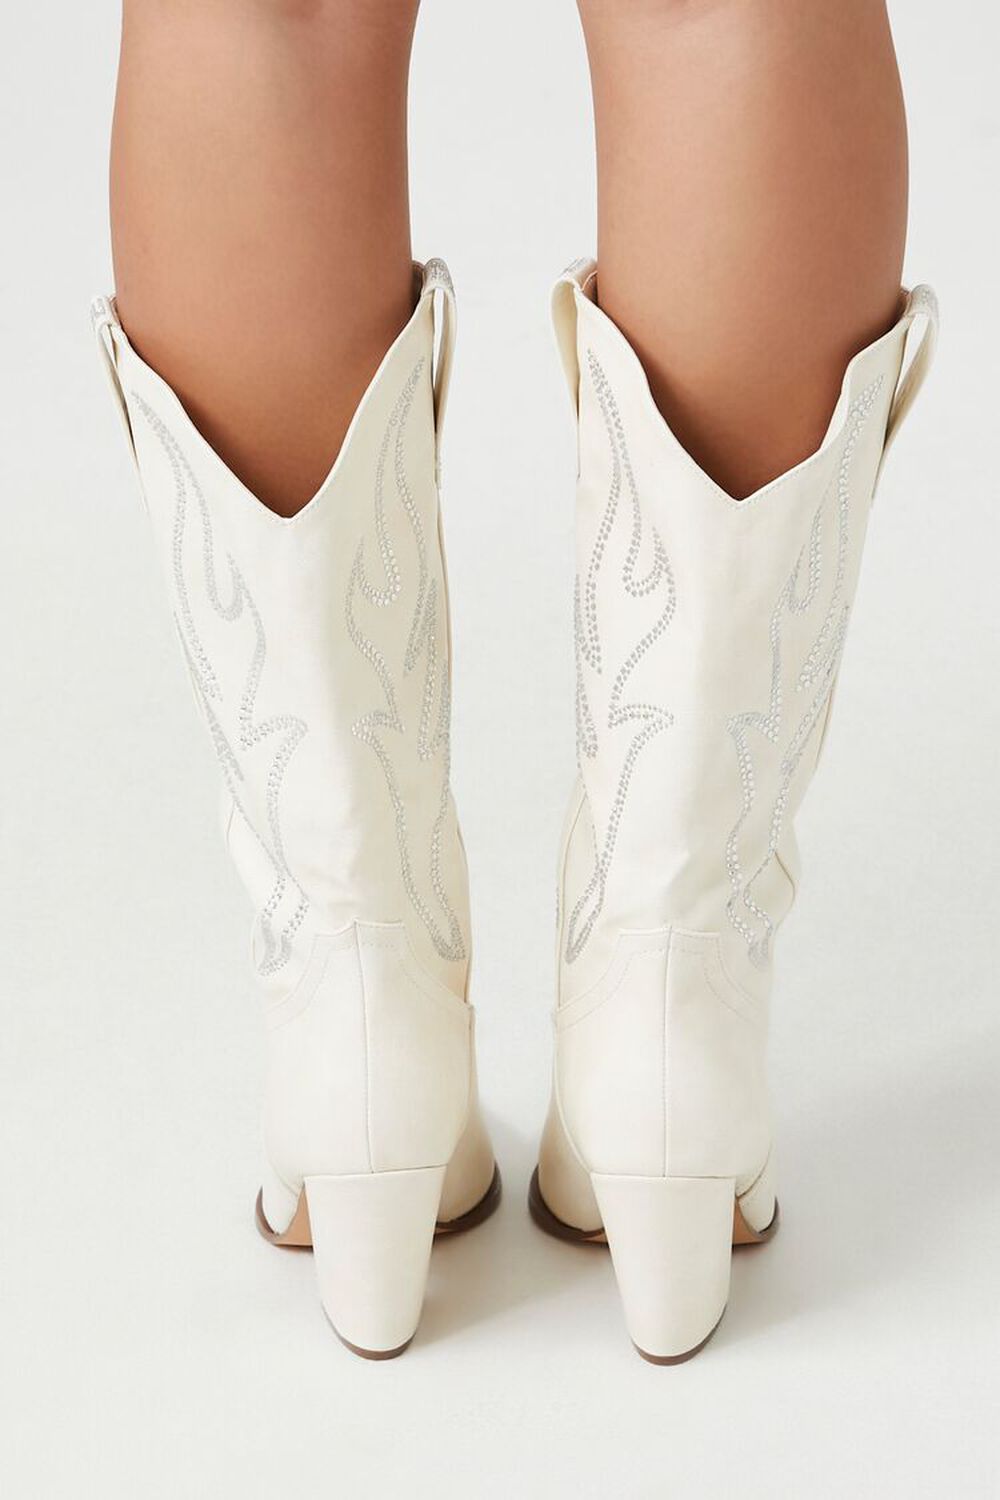 Dynamic Western Boot  Western boots, Forever 21 fashion, Nike pro women